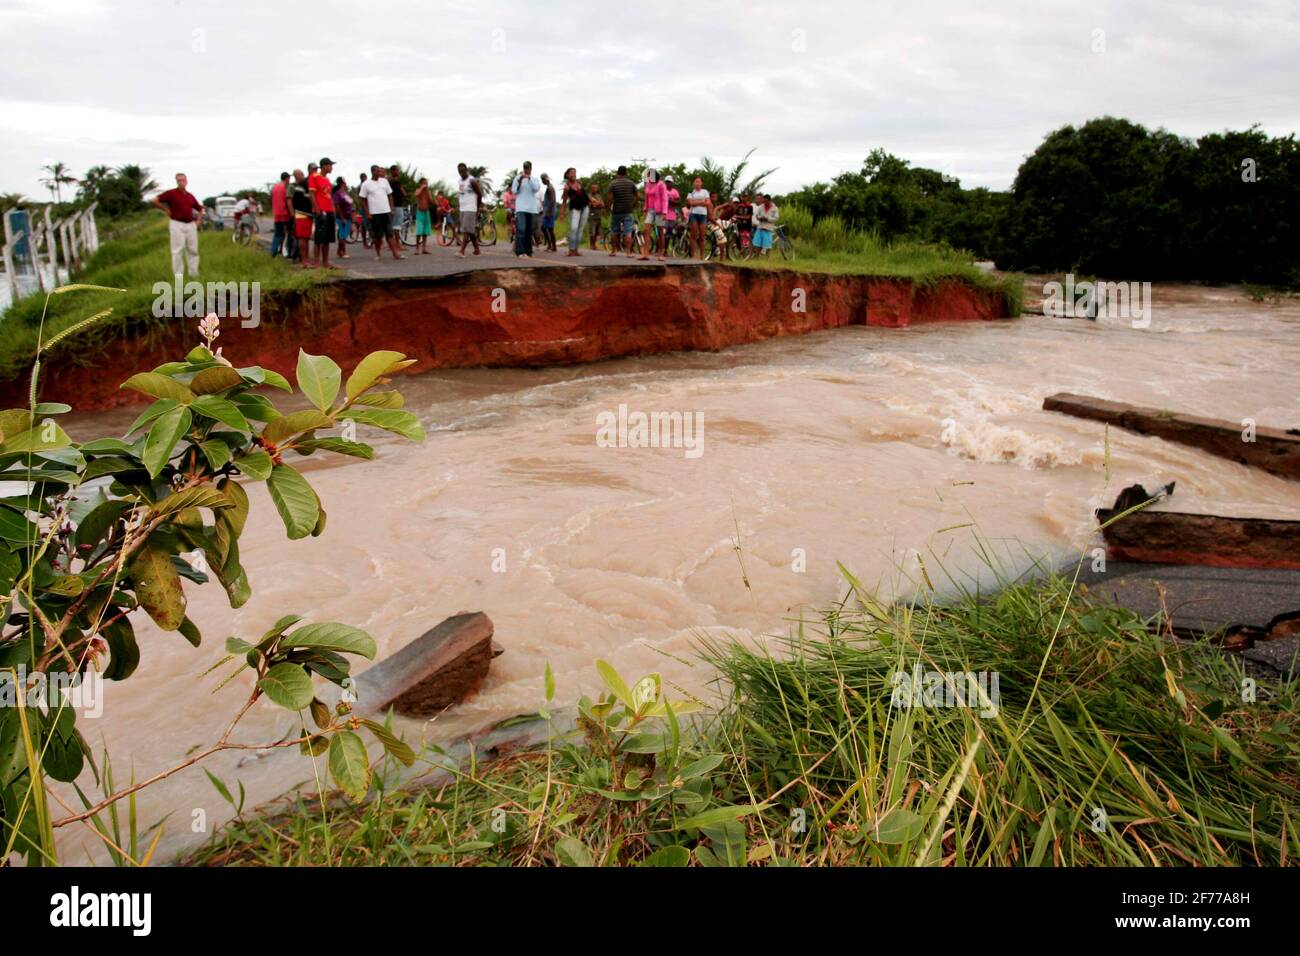 prado, bahia / brazil - april 8, 2010: bridge on highway br 489 is destroyed due to flooding of Campinho stream. communities are isolated in the munic Stock Photo